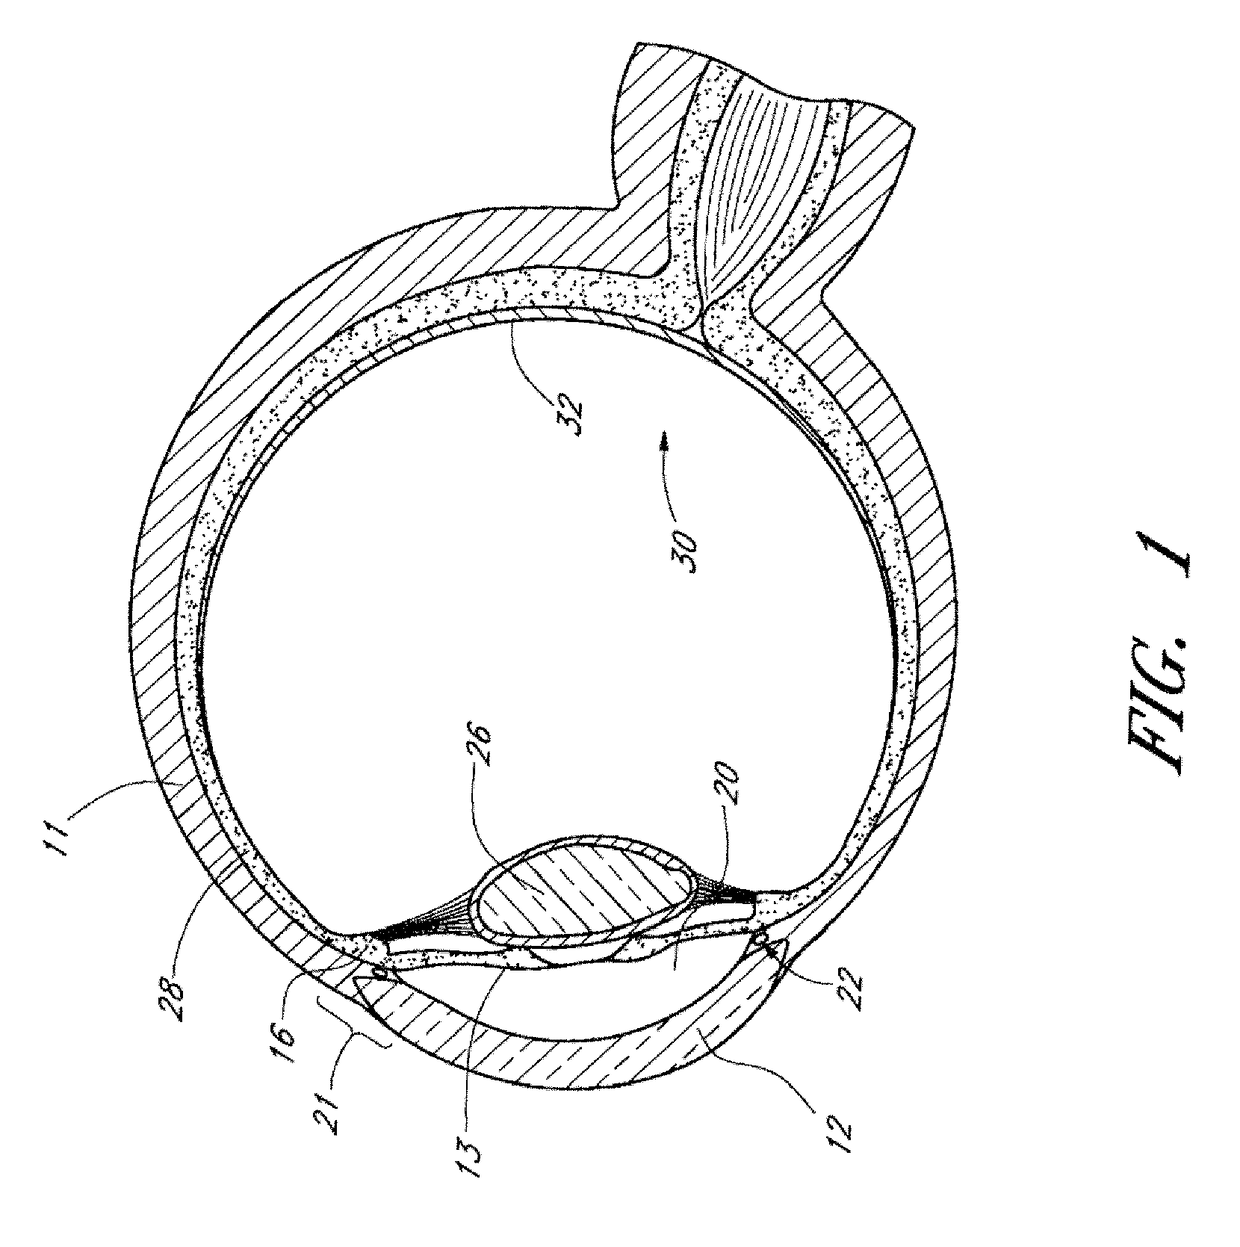 Drug delivery implants with bi-directional delivery capacity